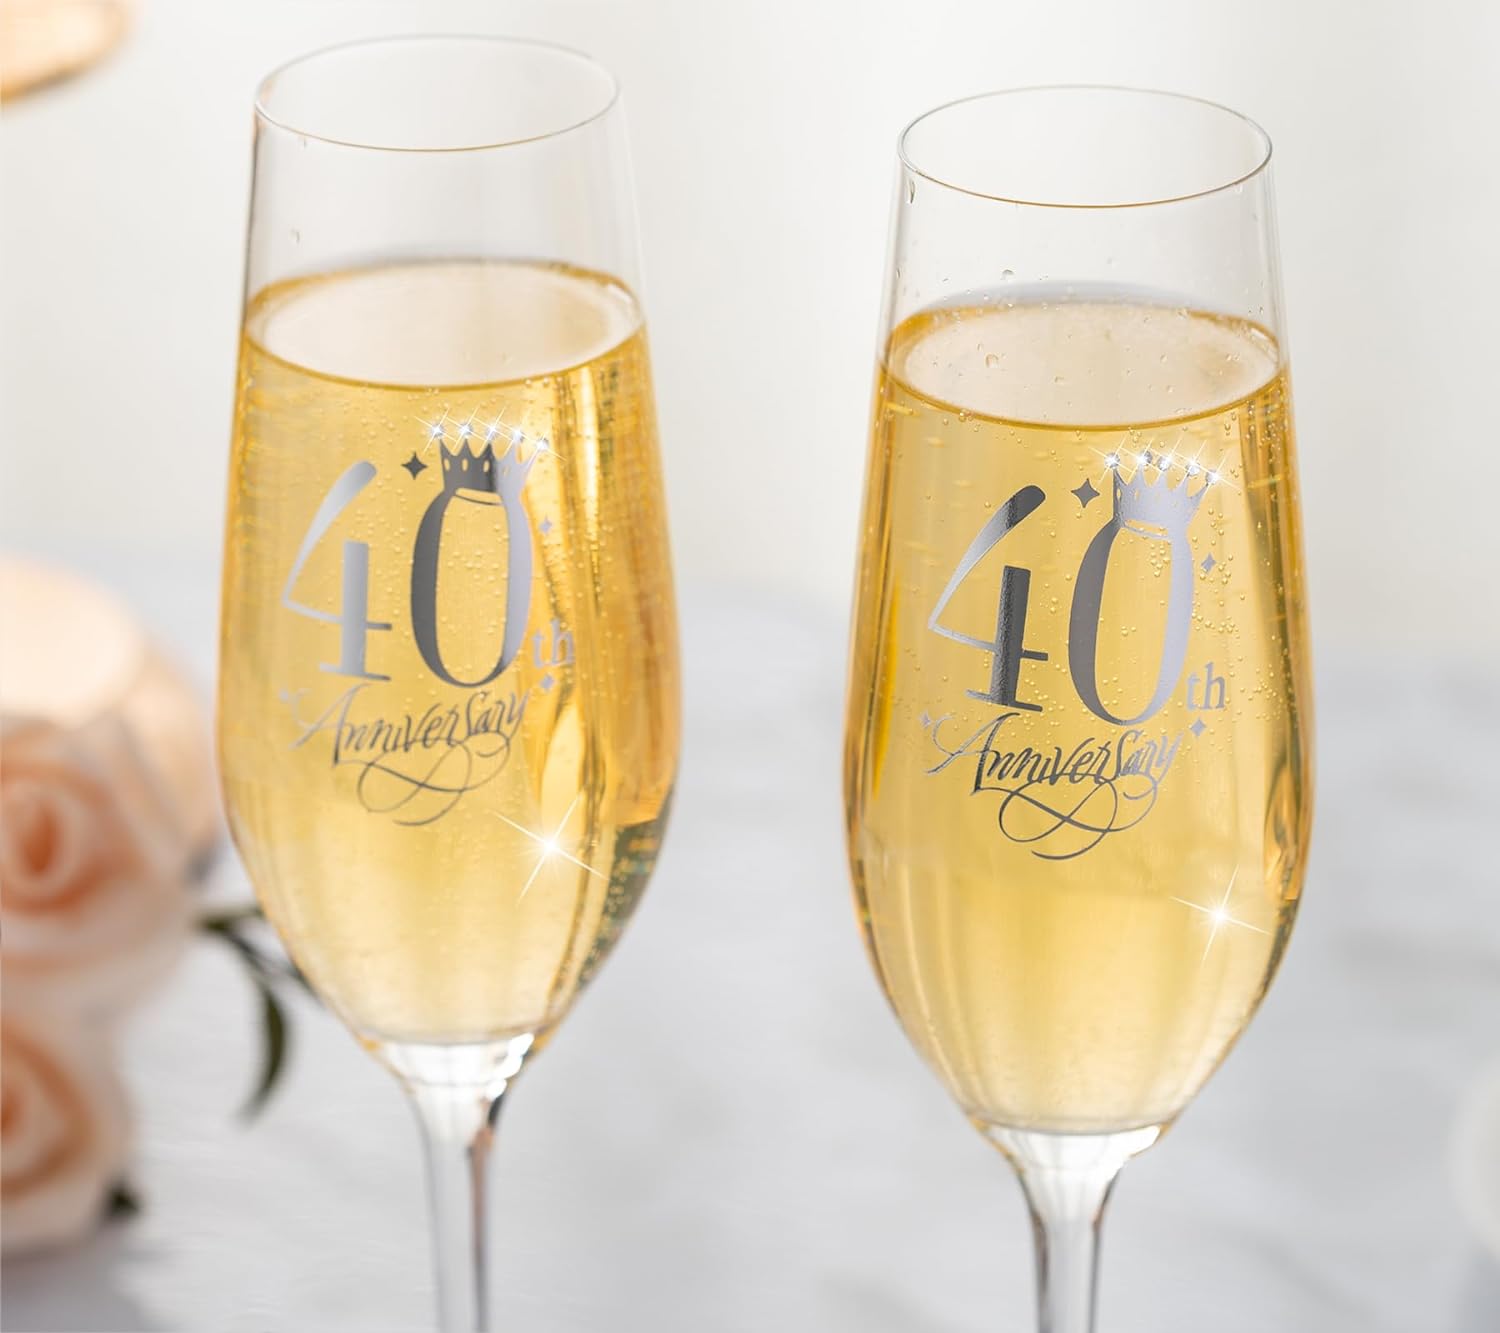 50th Wedding Anniversary Champagne Flutes Gifts 50th Anniversary Decorations Champagne Glasses Embellished with Rhinestones Couple Wedding Gifts for Anniversary, Gifts for Parents Anniversary - VARLKA